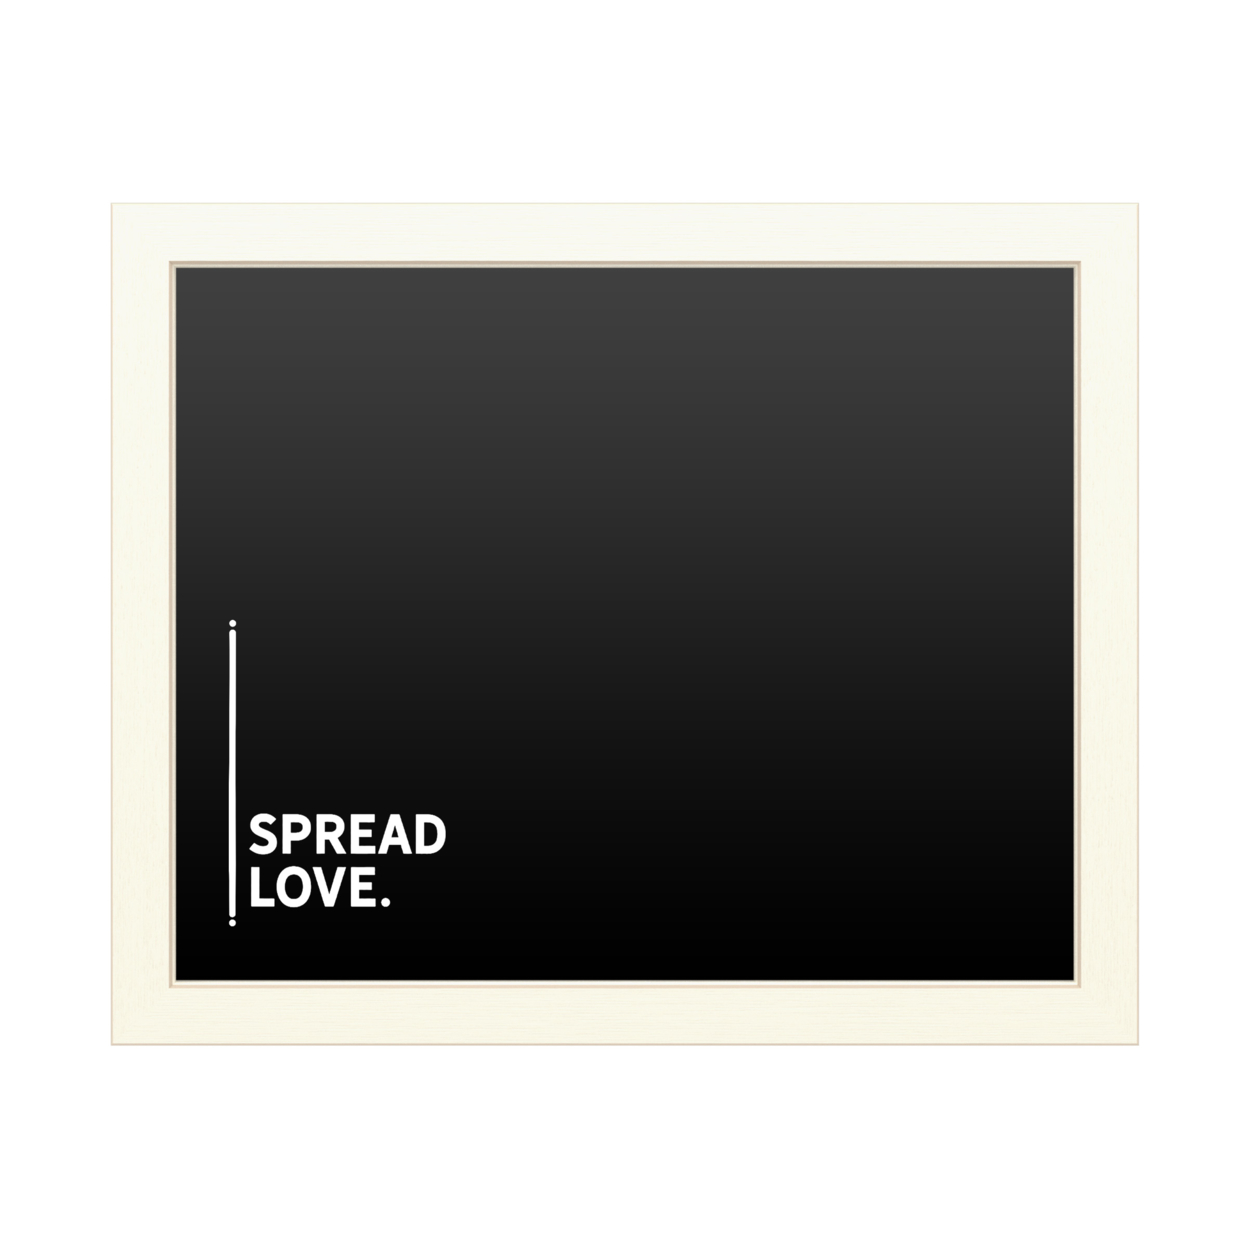 16 X 20 Chalk Board With Printed Artwork - Spread Love White Board - Ready To Hang Chalkboard